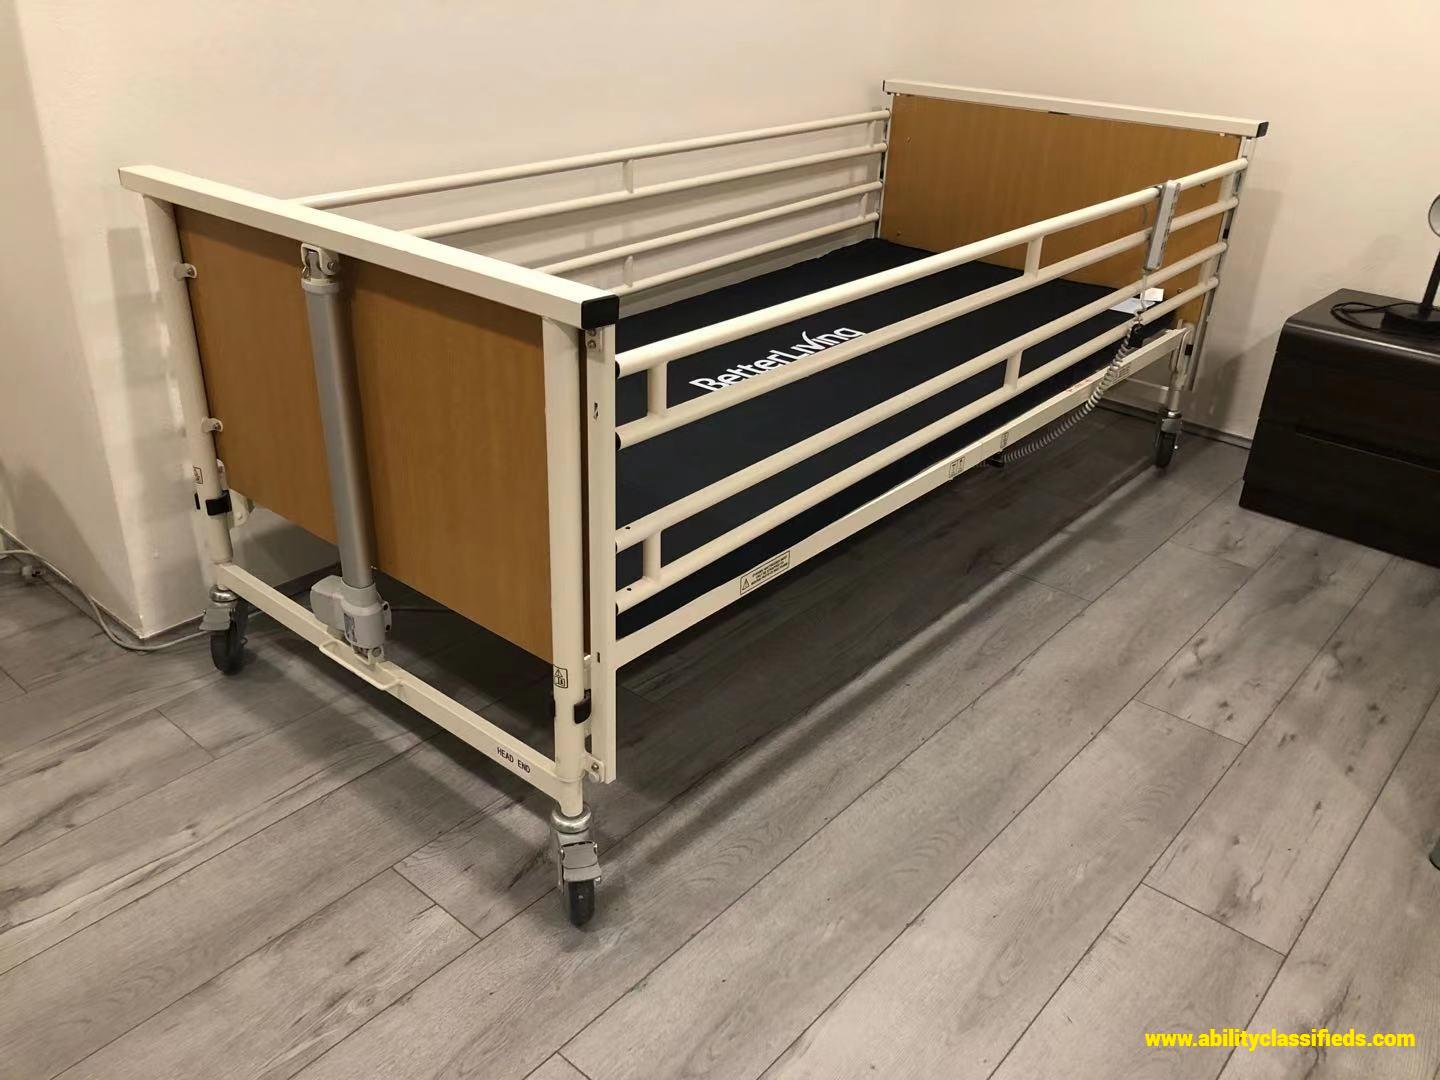 Electric transportable bed with air mattress